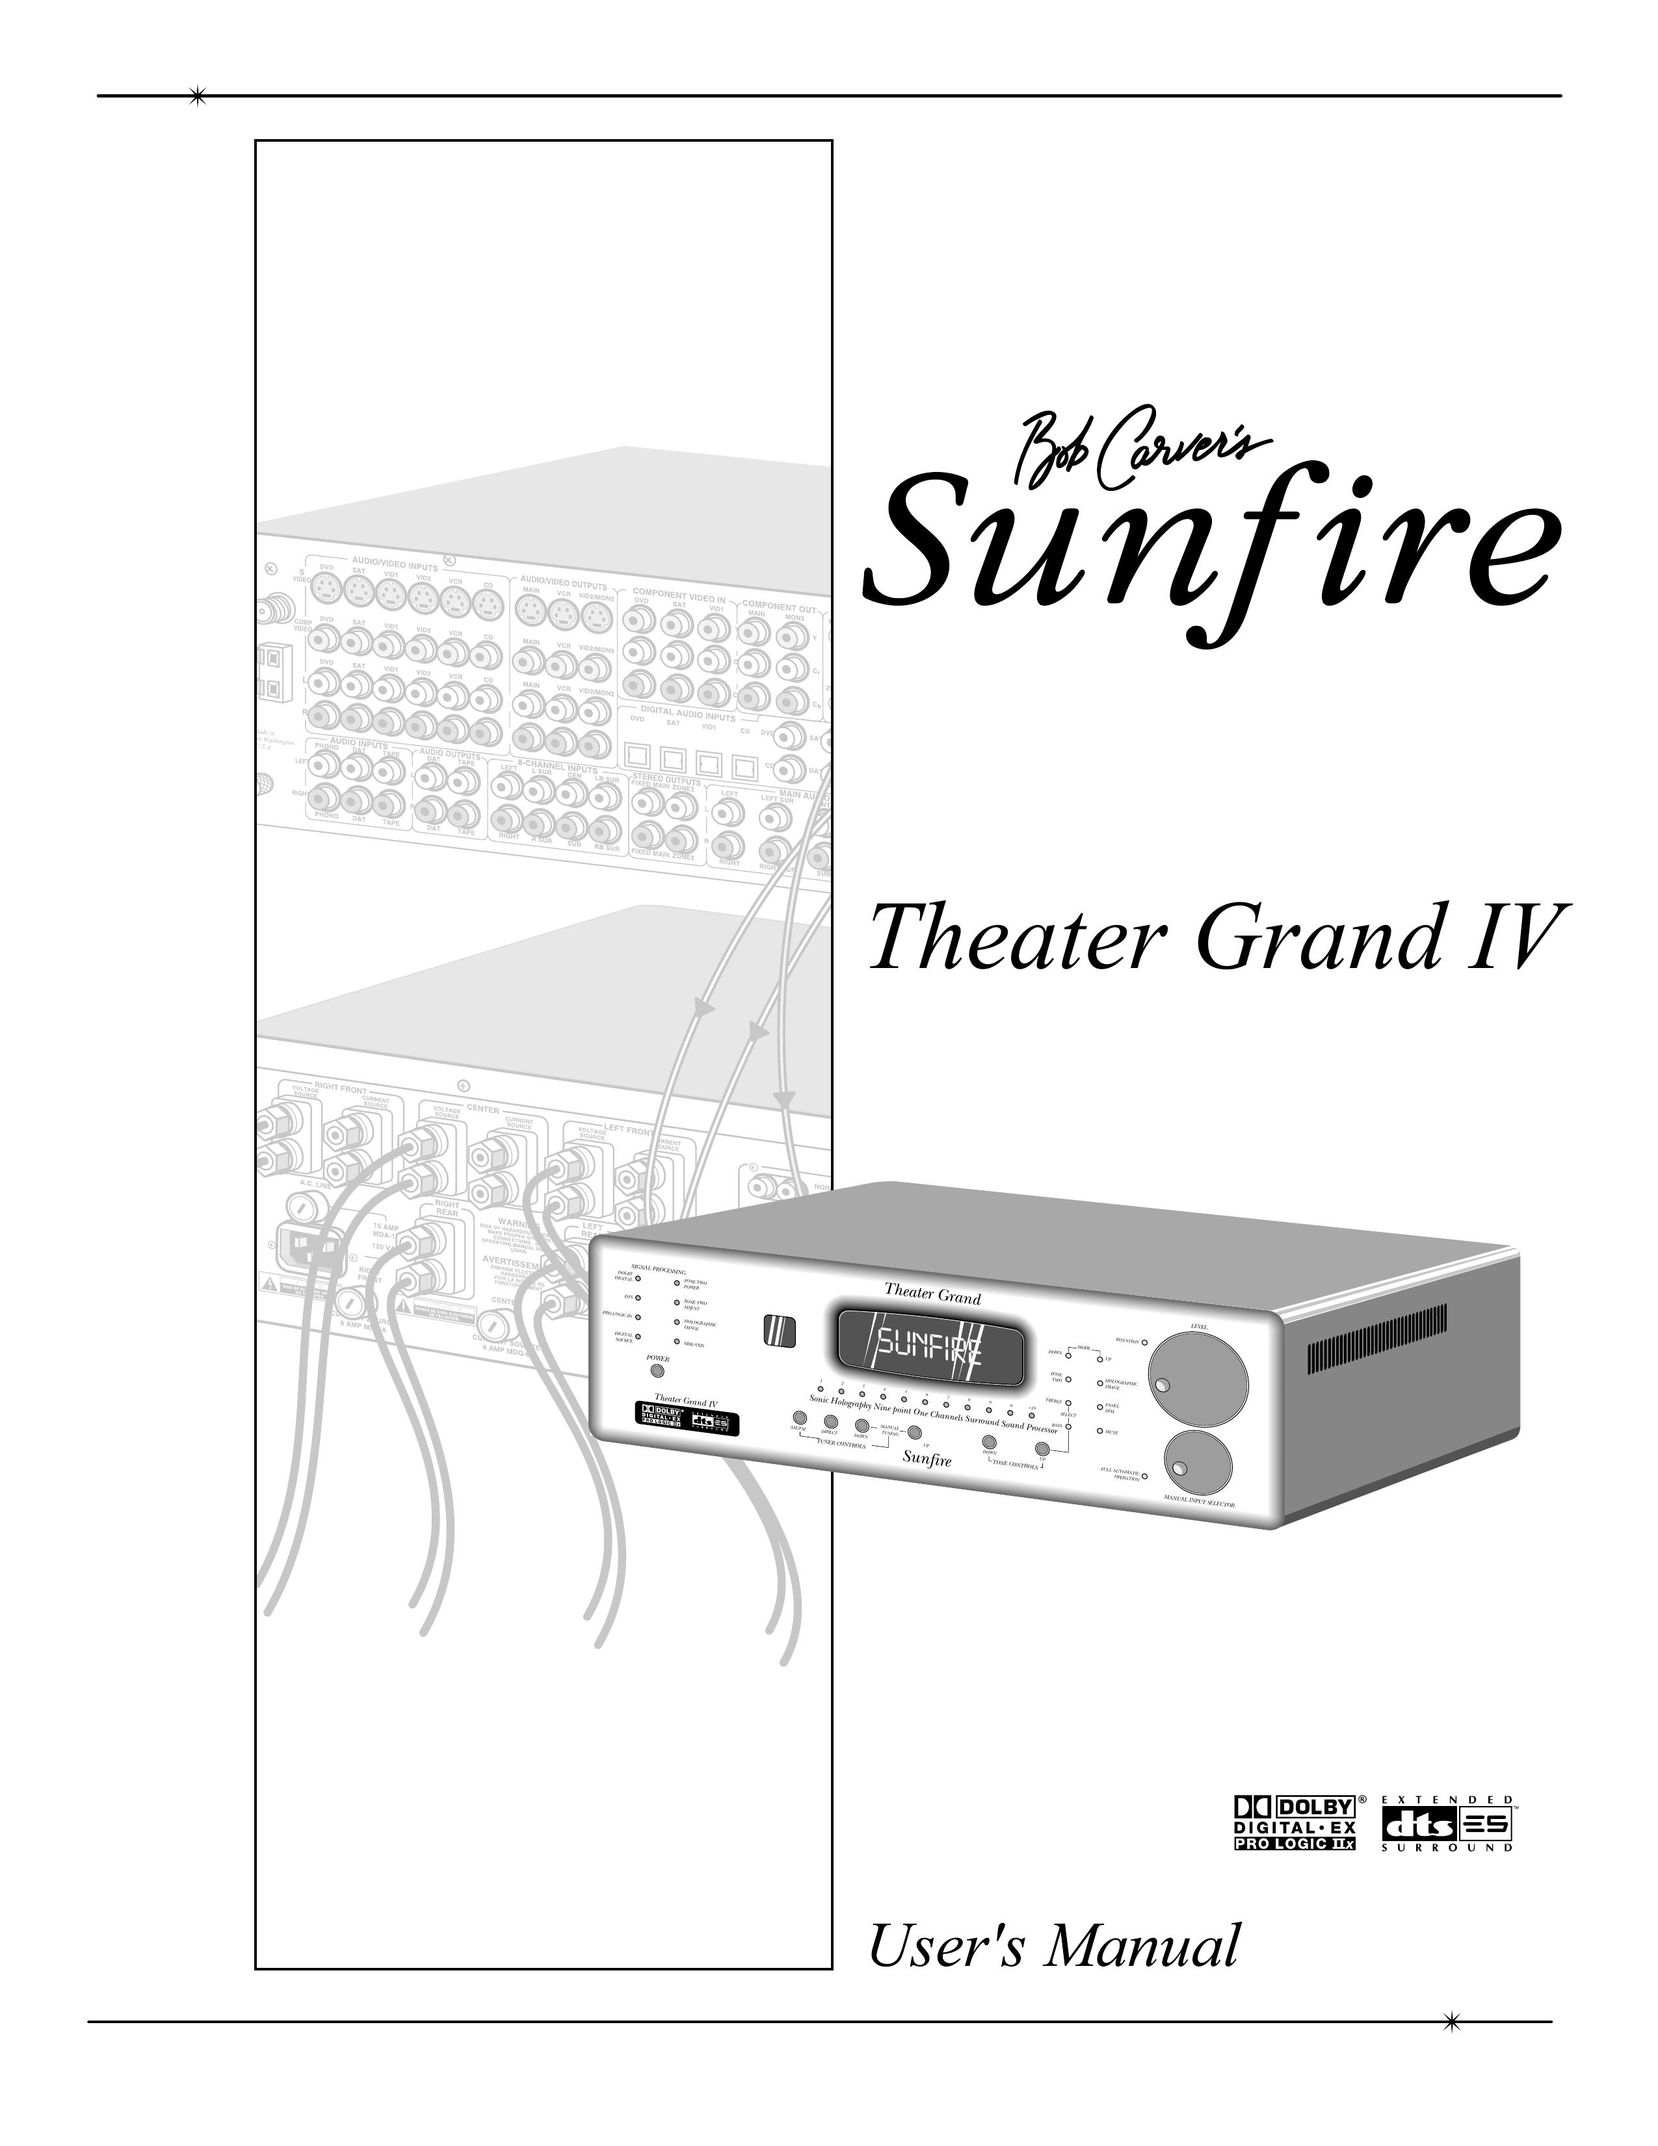 Sunfire IV Home Theater System User Manual